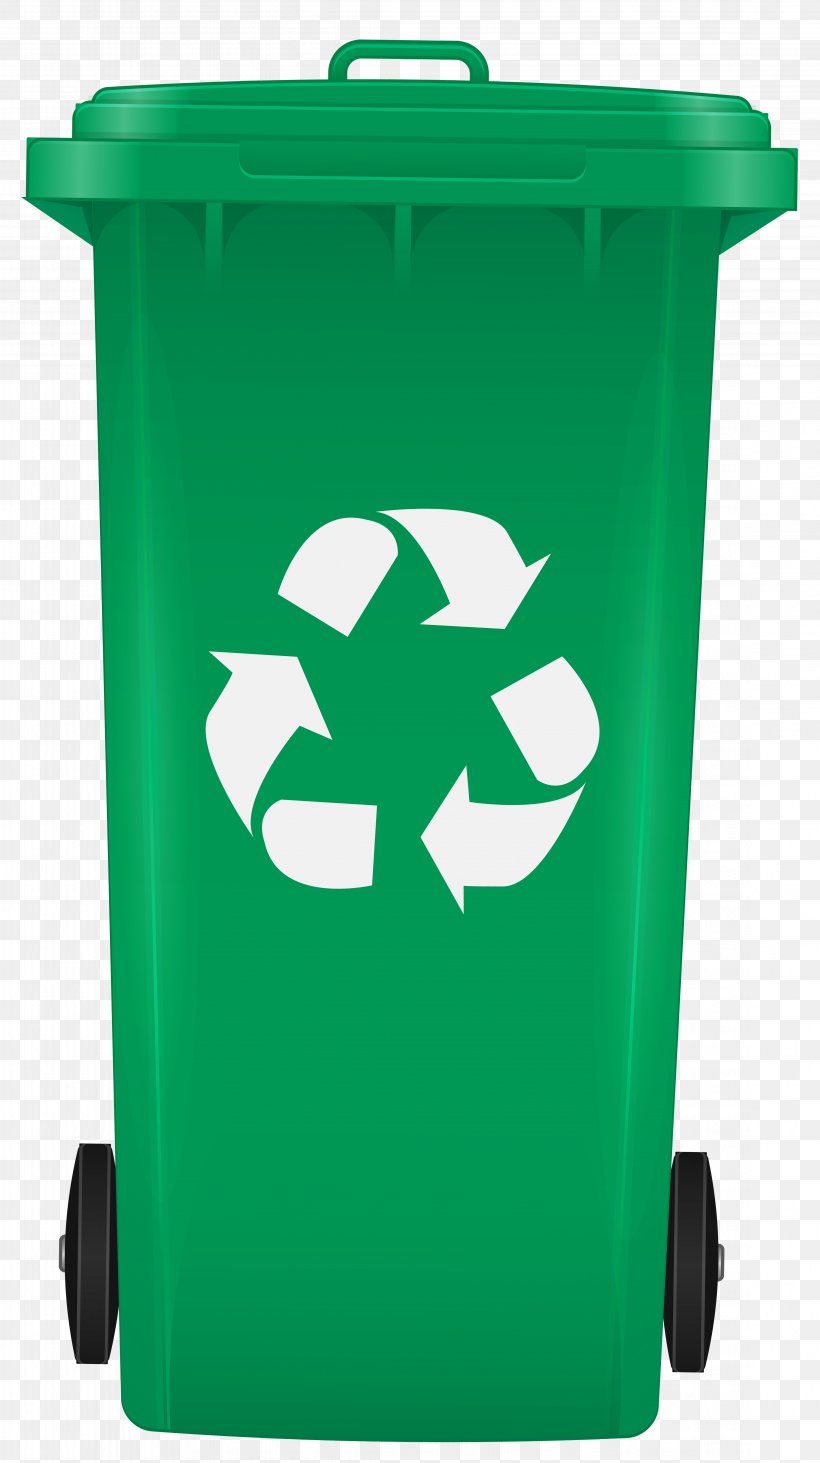 Recycling Bin Rubbish Bins & Waste Paper Baskets Waste Collection, PNG, 4481x8000px, Recycling, Green, Irecycle, Landfill, Plastic Download Free